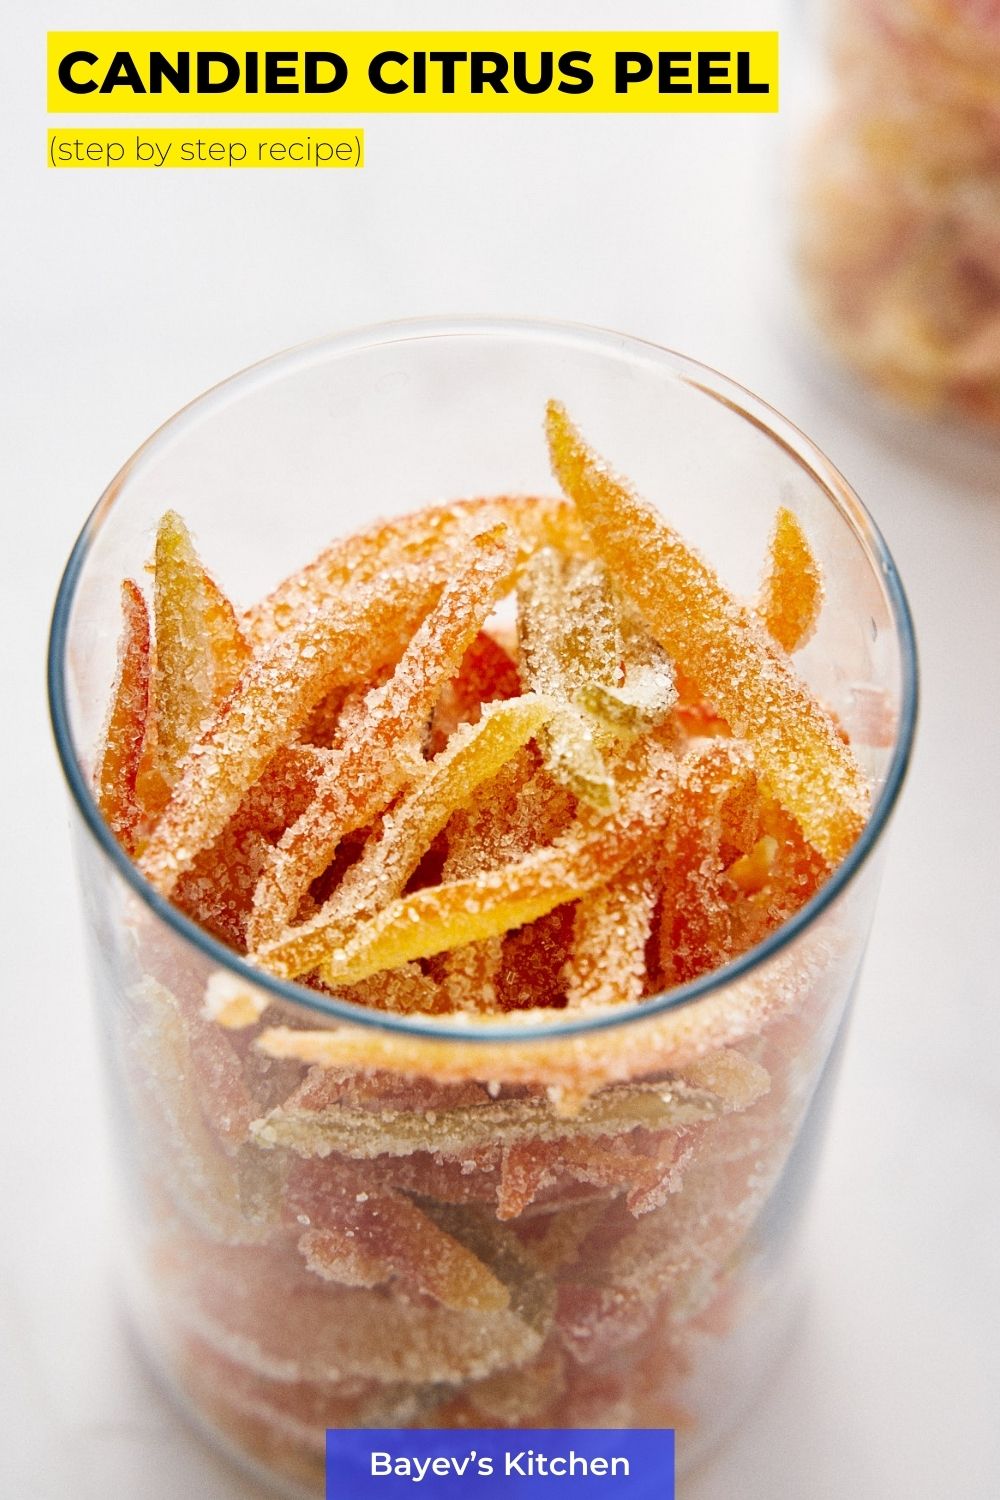 Succades — Сandied citrus peel. Candied Citrus Peel step by step recipe with photo